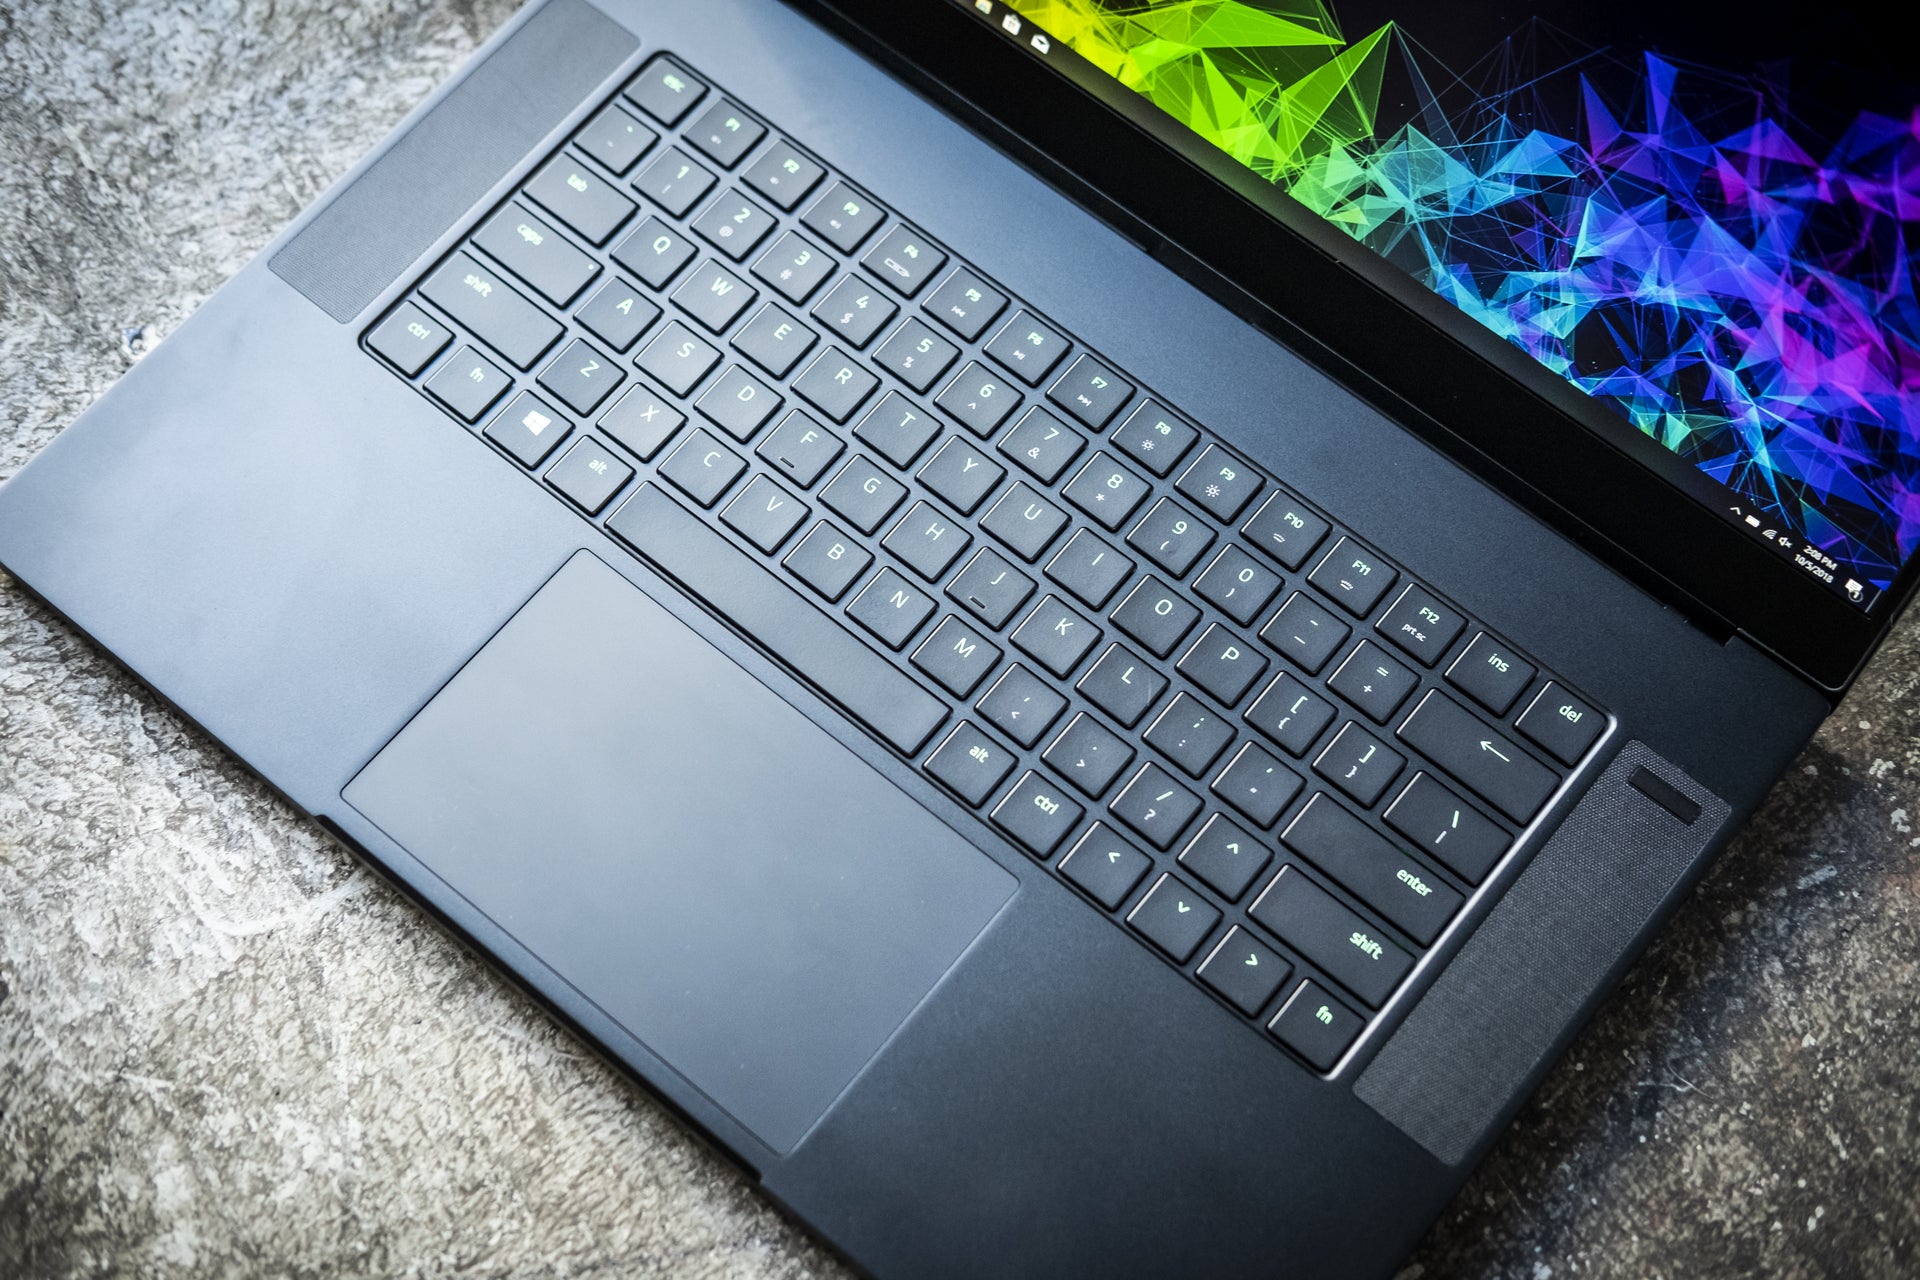 Razer Blade 15 Review The world's smallest 15inch gaming laptop packs